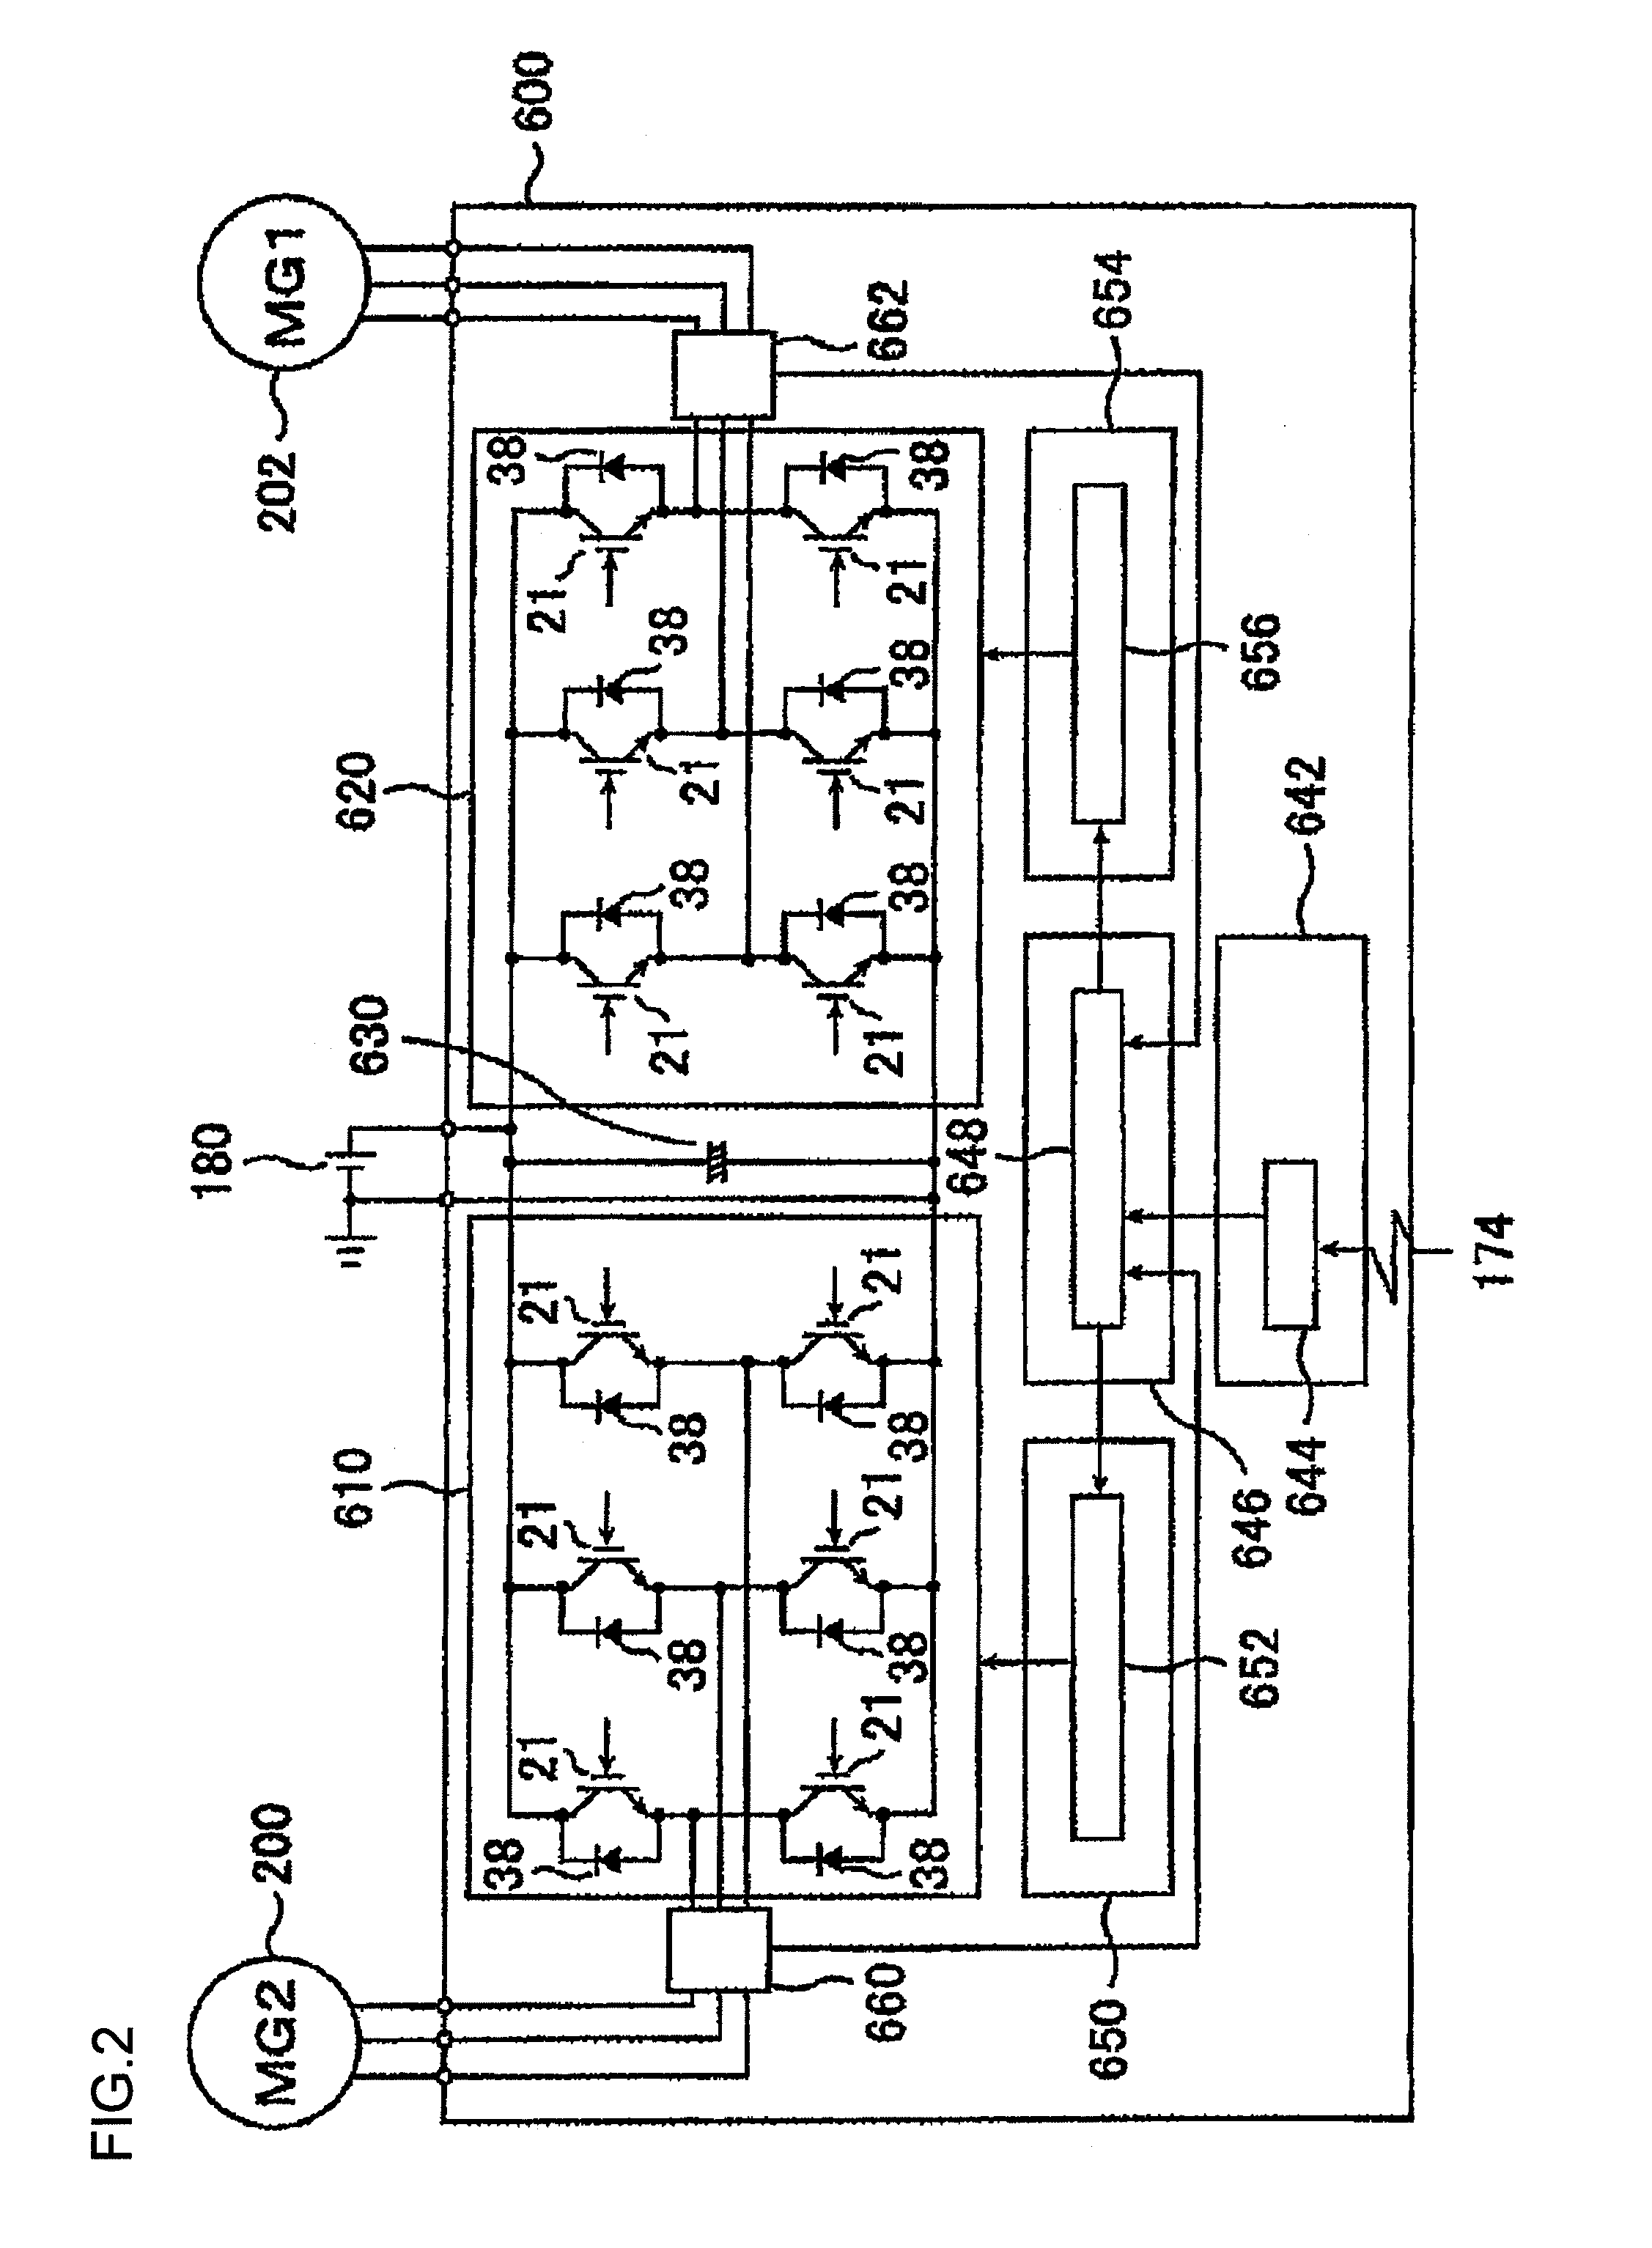 Rotor and rotating electric machine equipped with the rotor